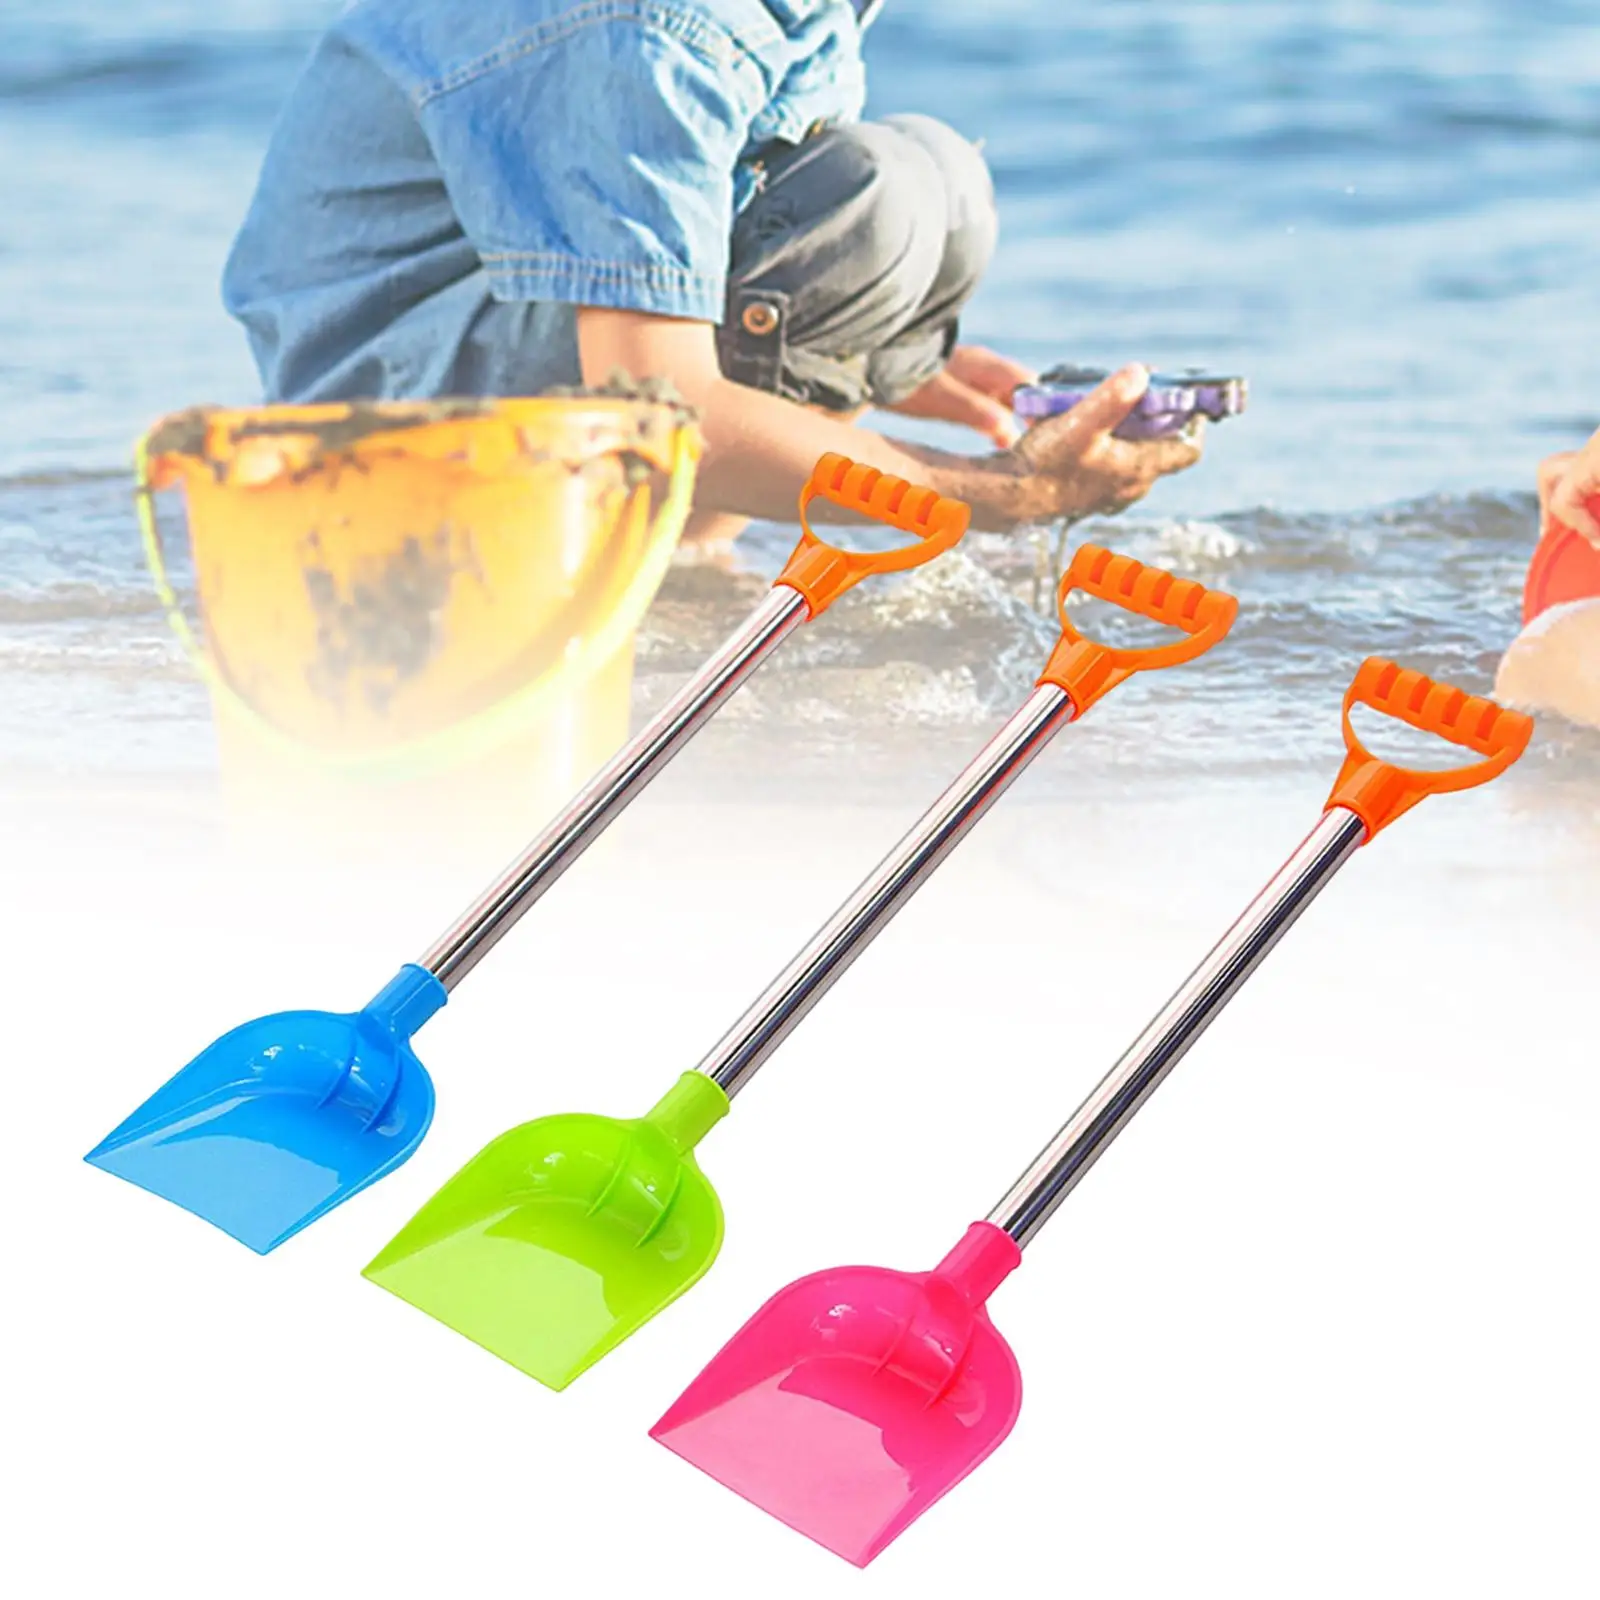 3x Child Beach Toys Gardening Tool Set Outdoor Toy Durable Garden Toy for Party Favor Outdoor Indoor Sand Toddlers